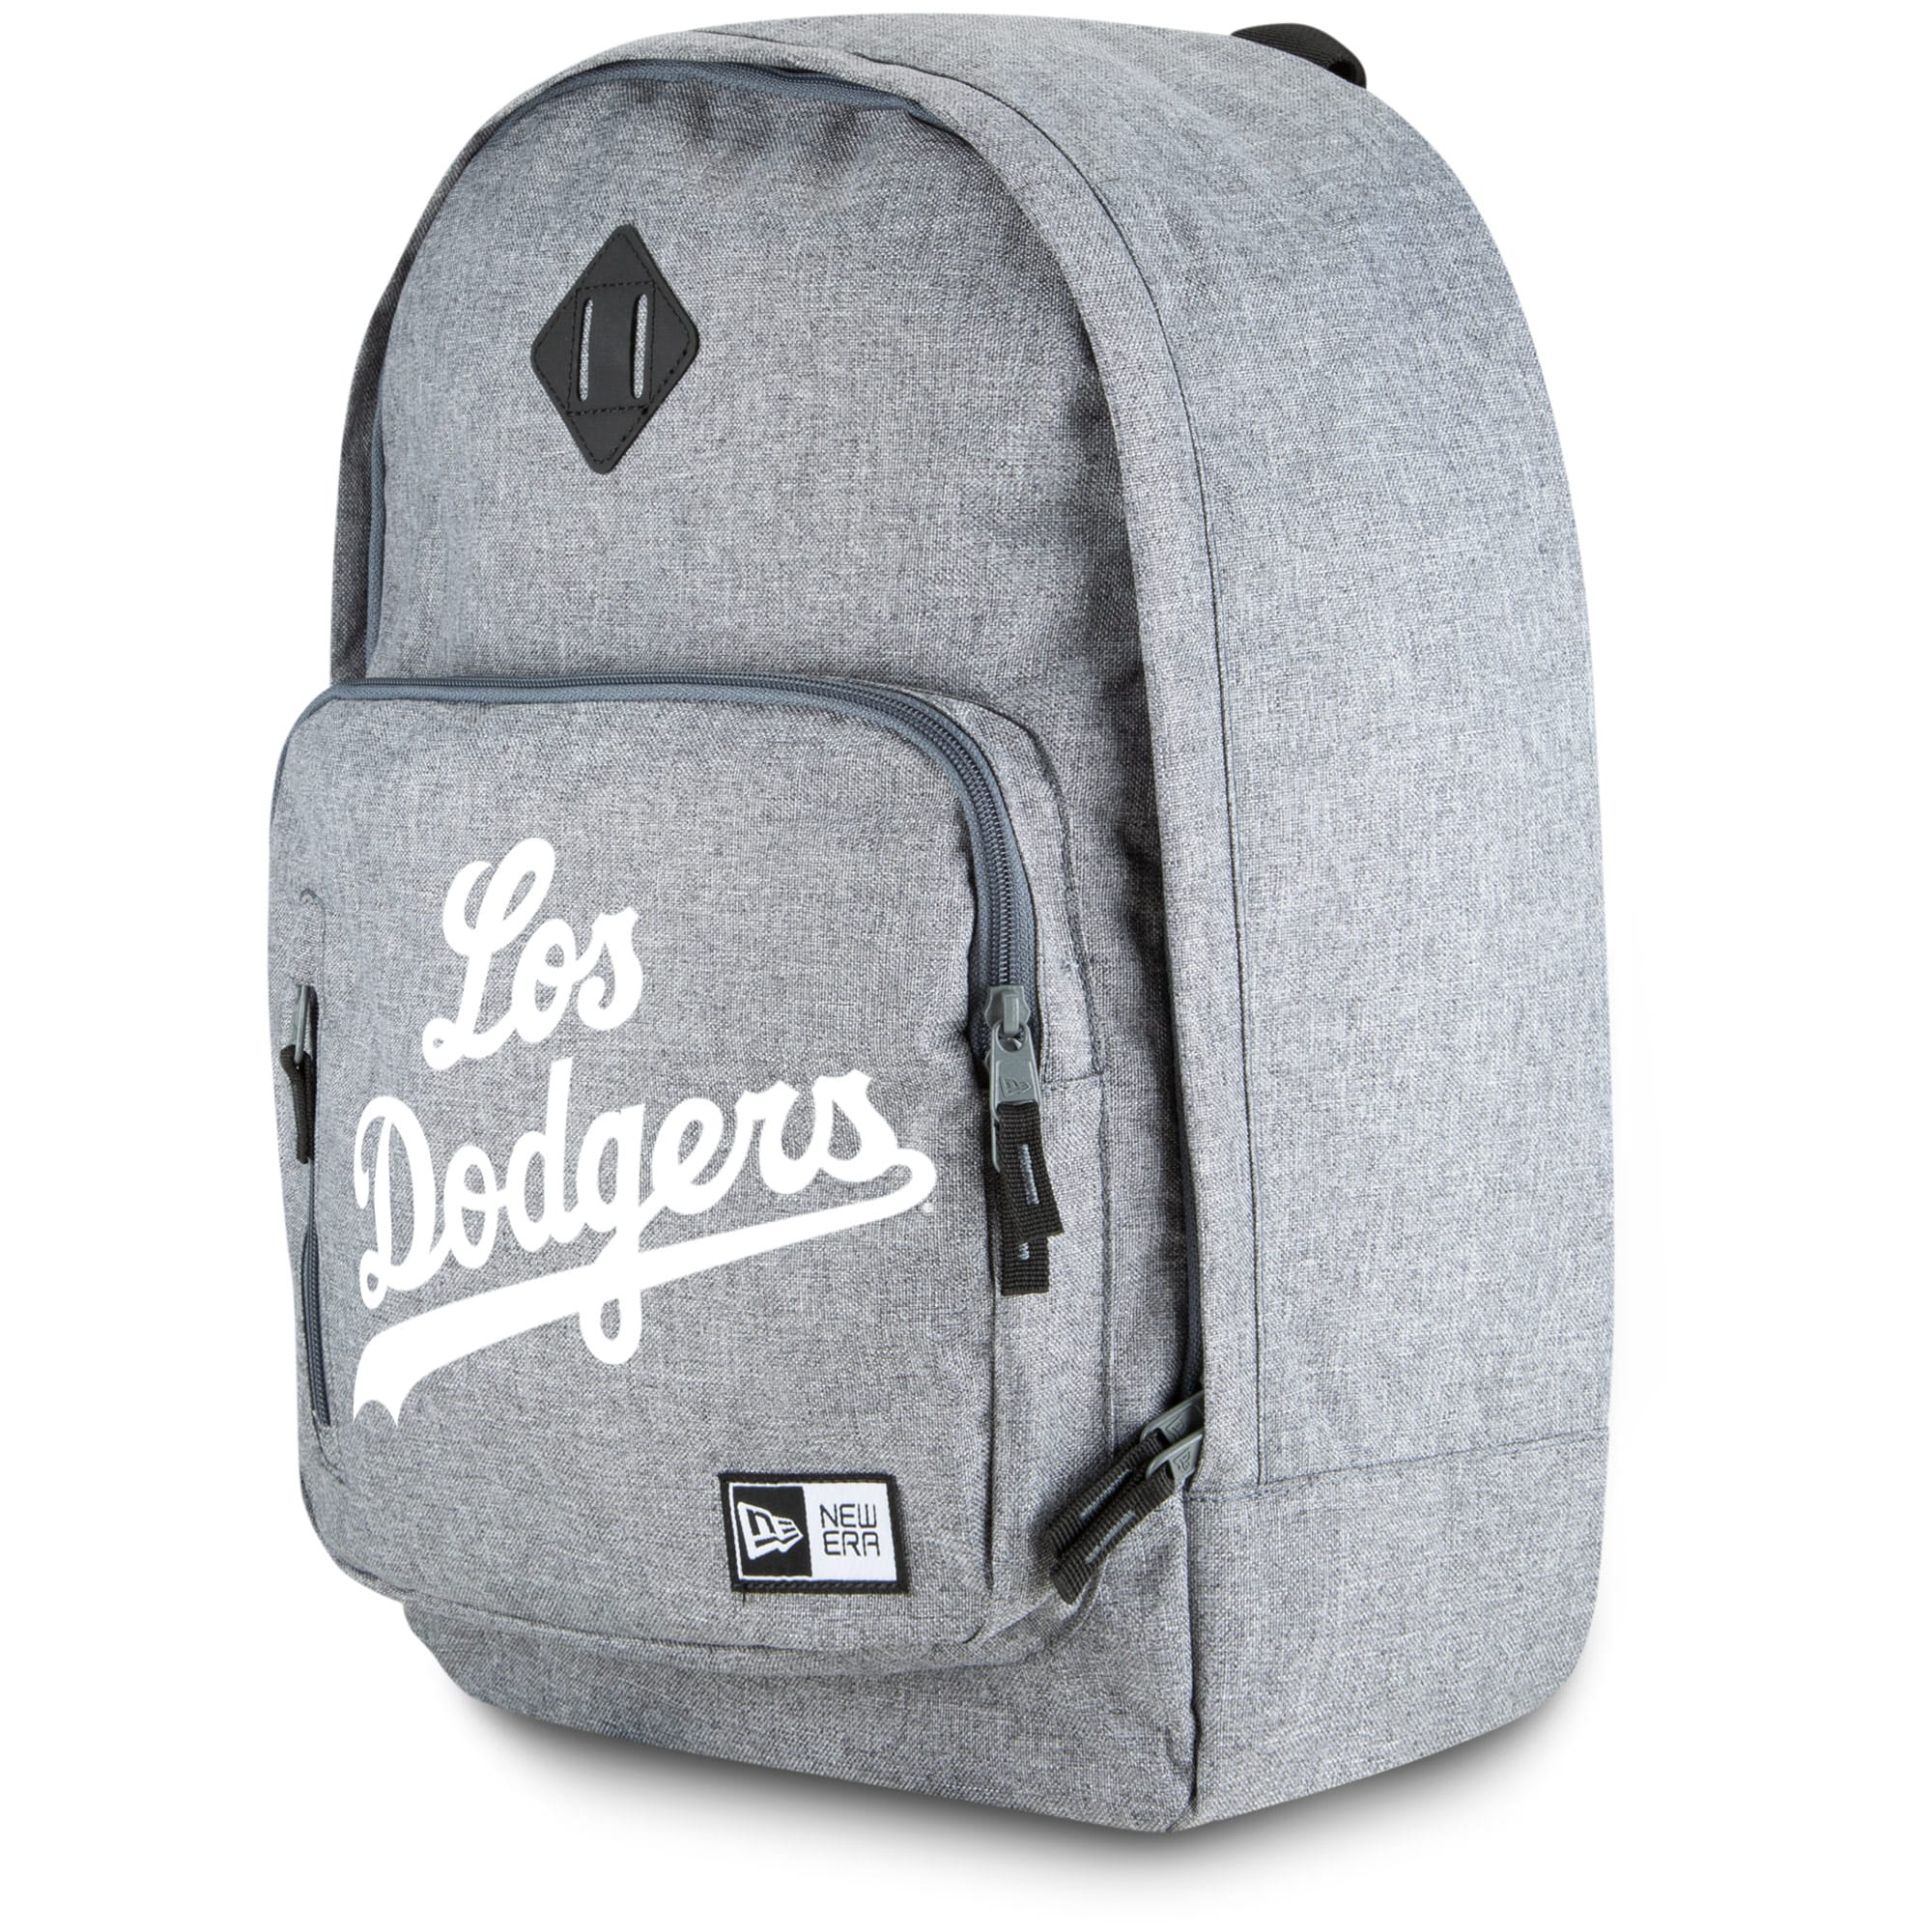 New Era Los Angeles Dodgers Cram City Connect Backpack - image 1 of 5